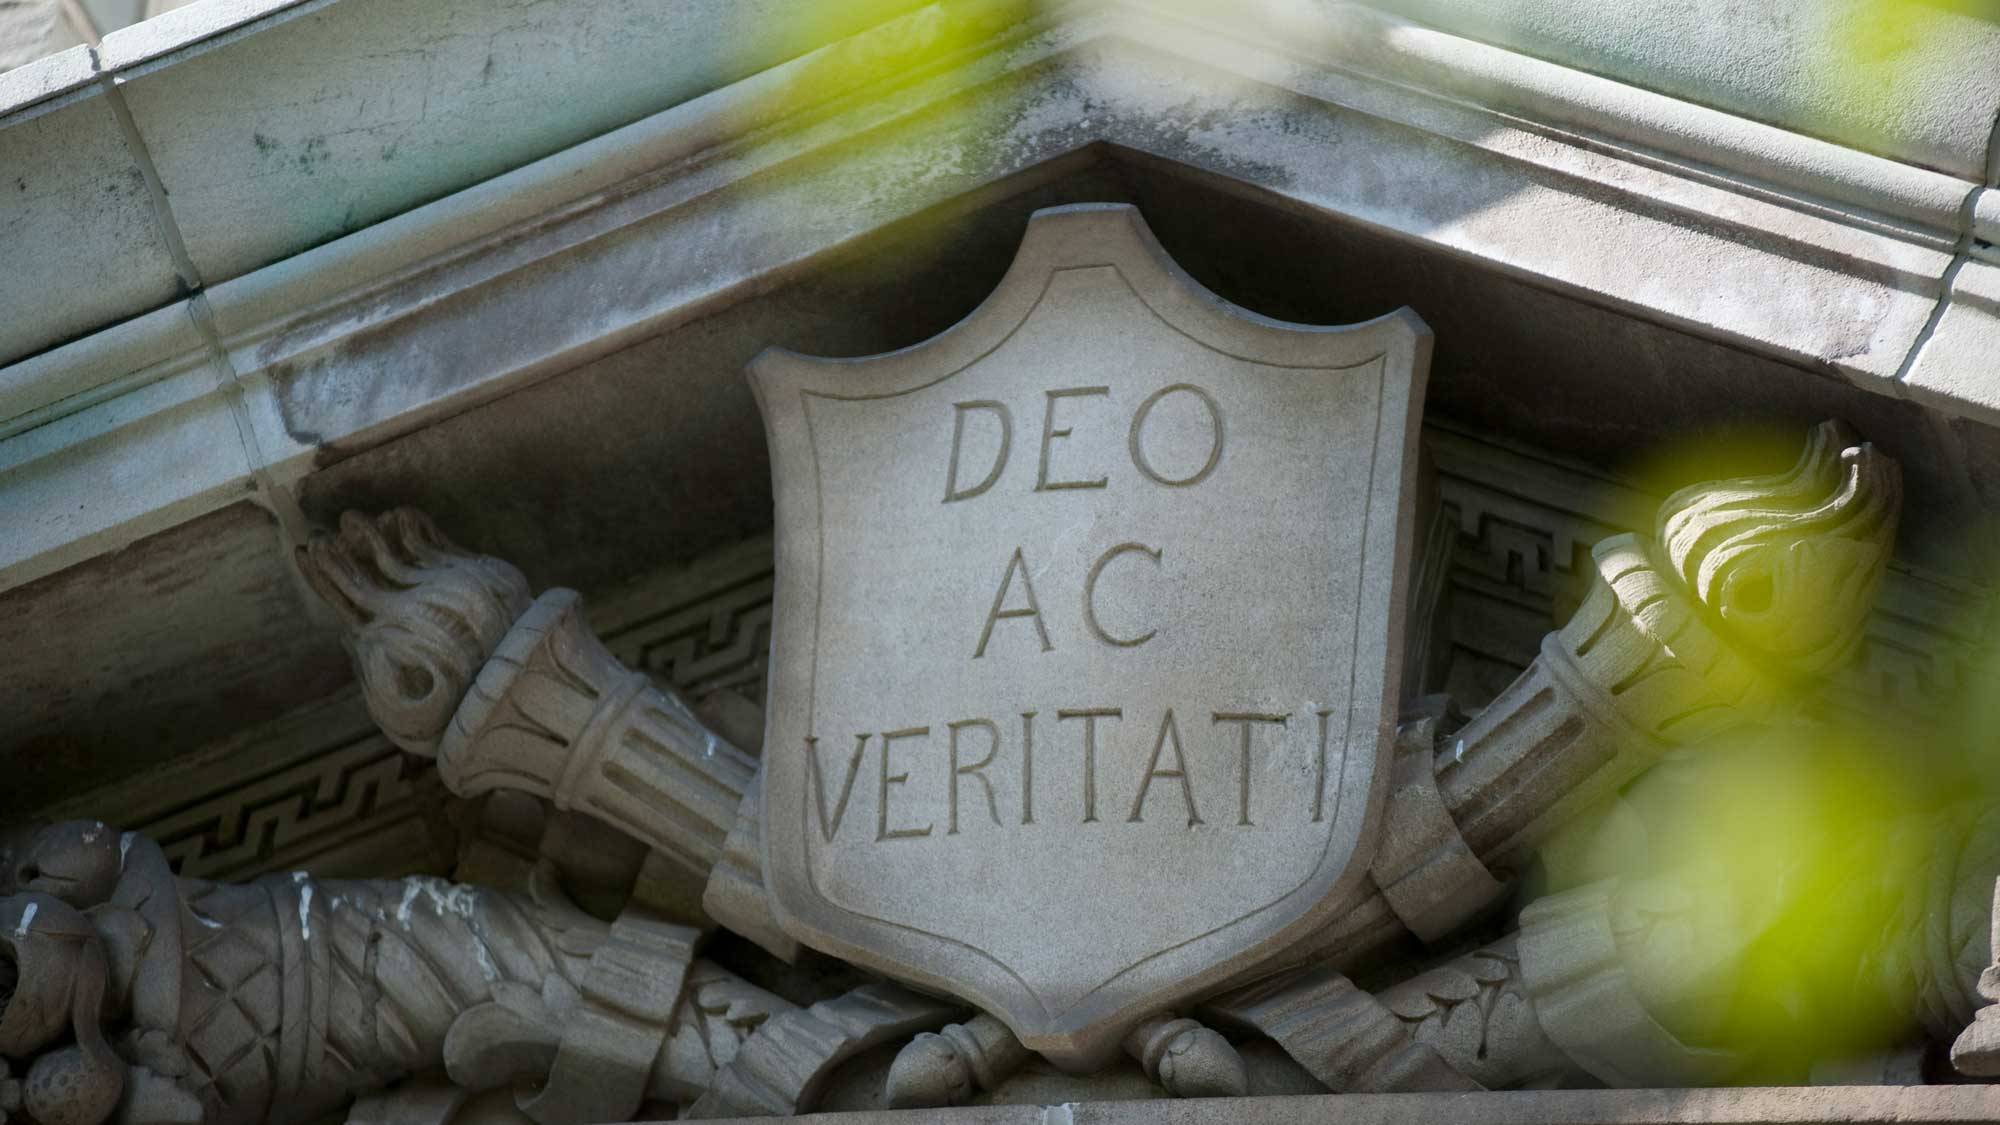 Image of the Colgate motto, "Deo Ac Veritati," engraved into a stone crest